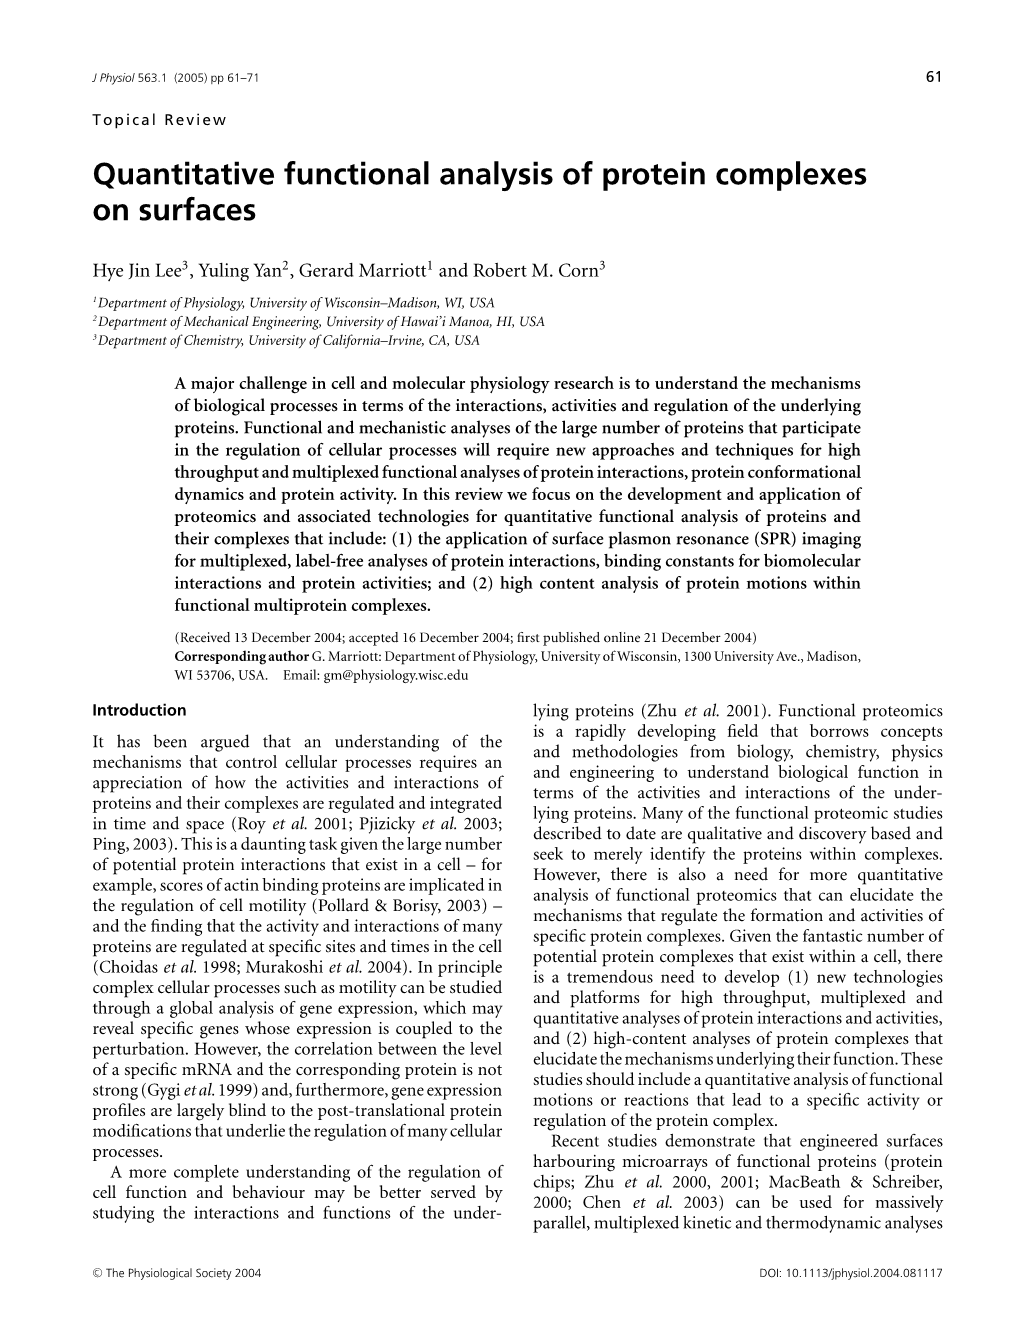 Quantitative Functional Analysis of Protein Complexes on Surfaces